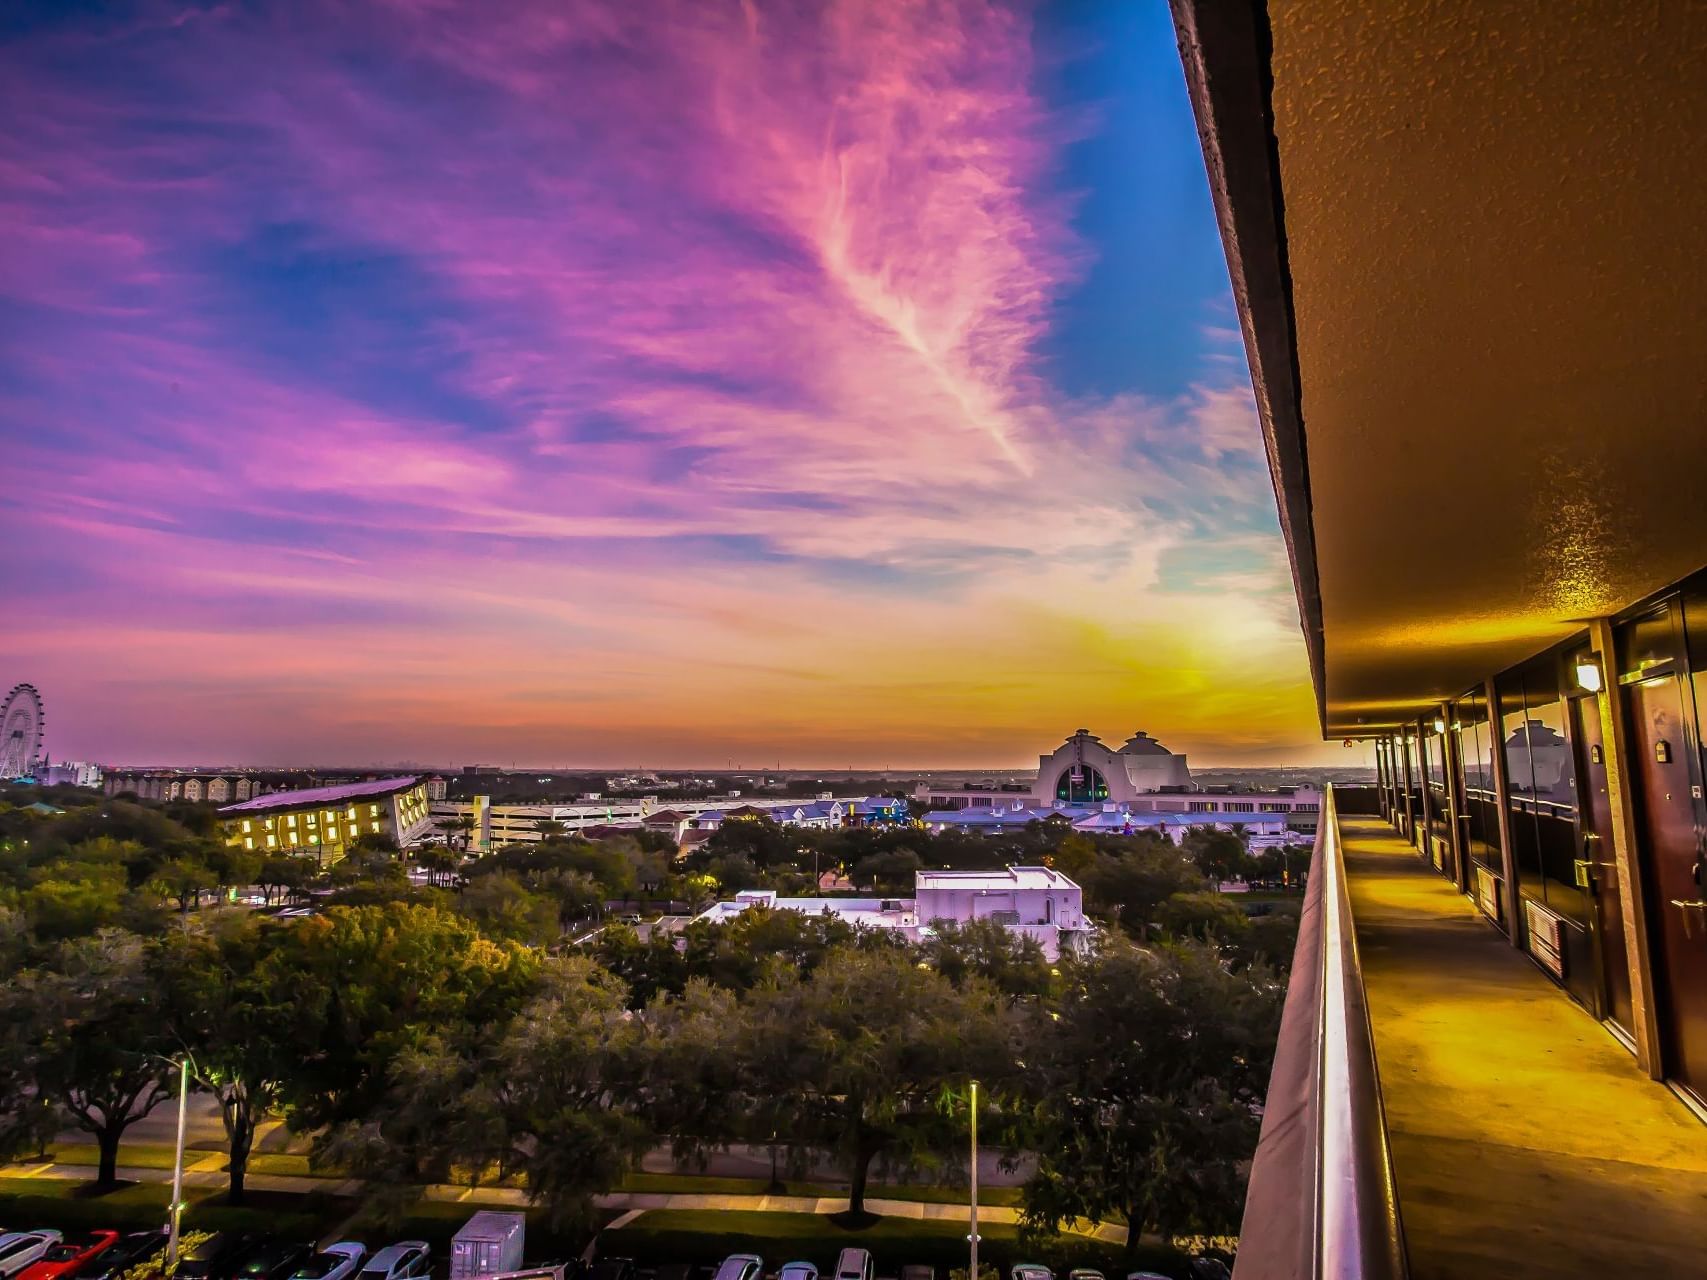 City view from a balcony at sunset, Rosen Inn at Pointe Orlando